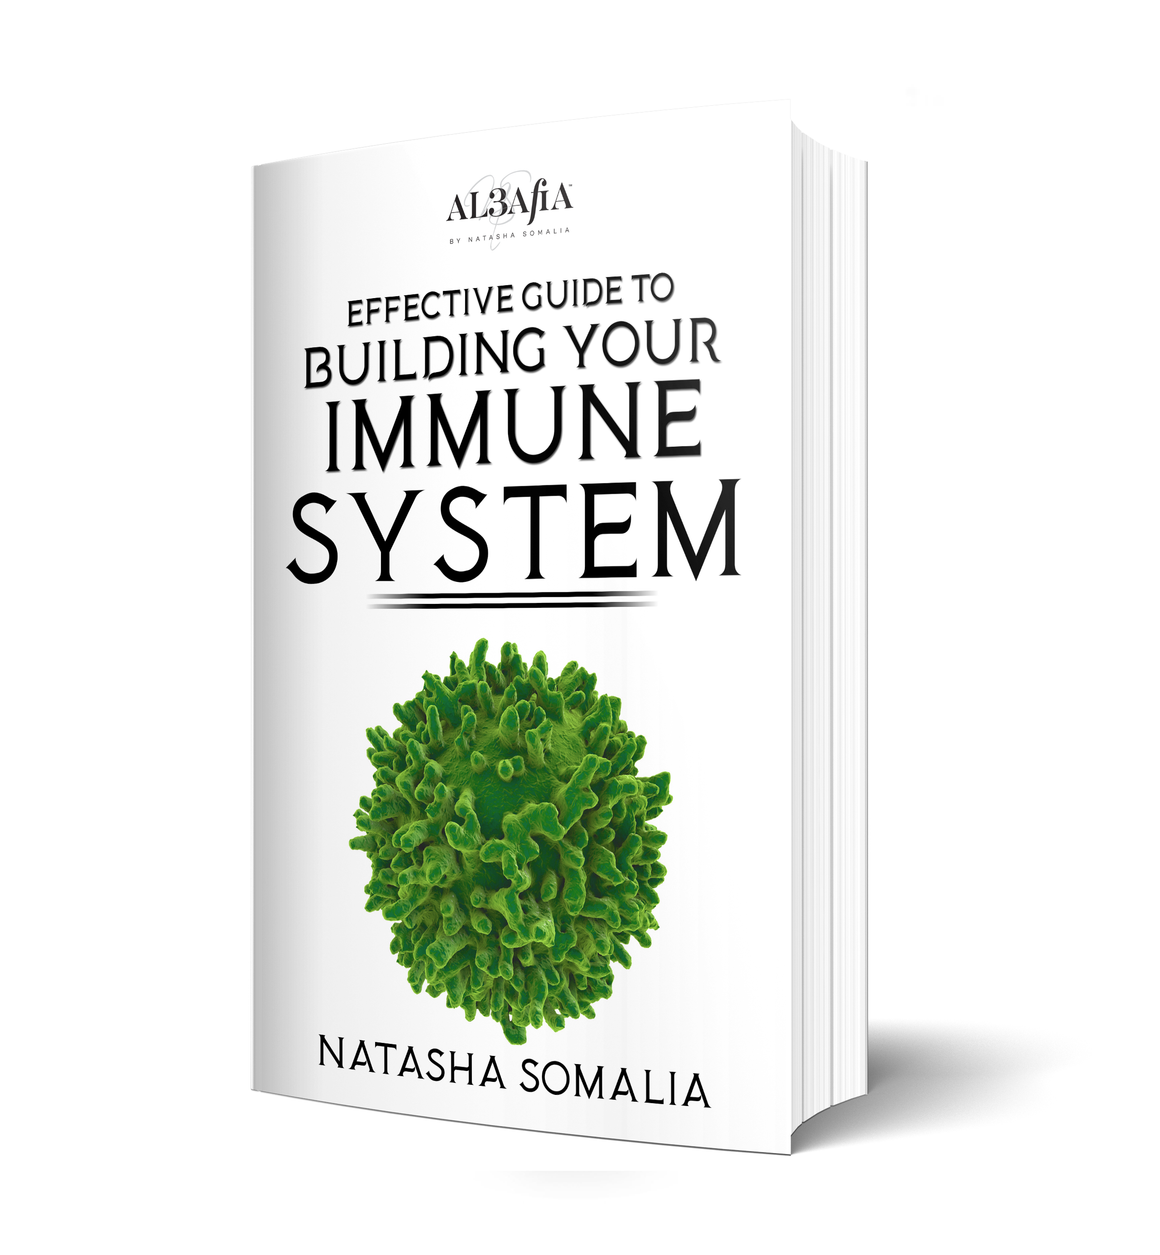 Effective Guide To Building Your Immune System By Natasha Somalia